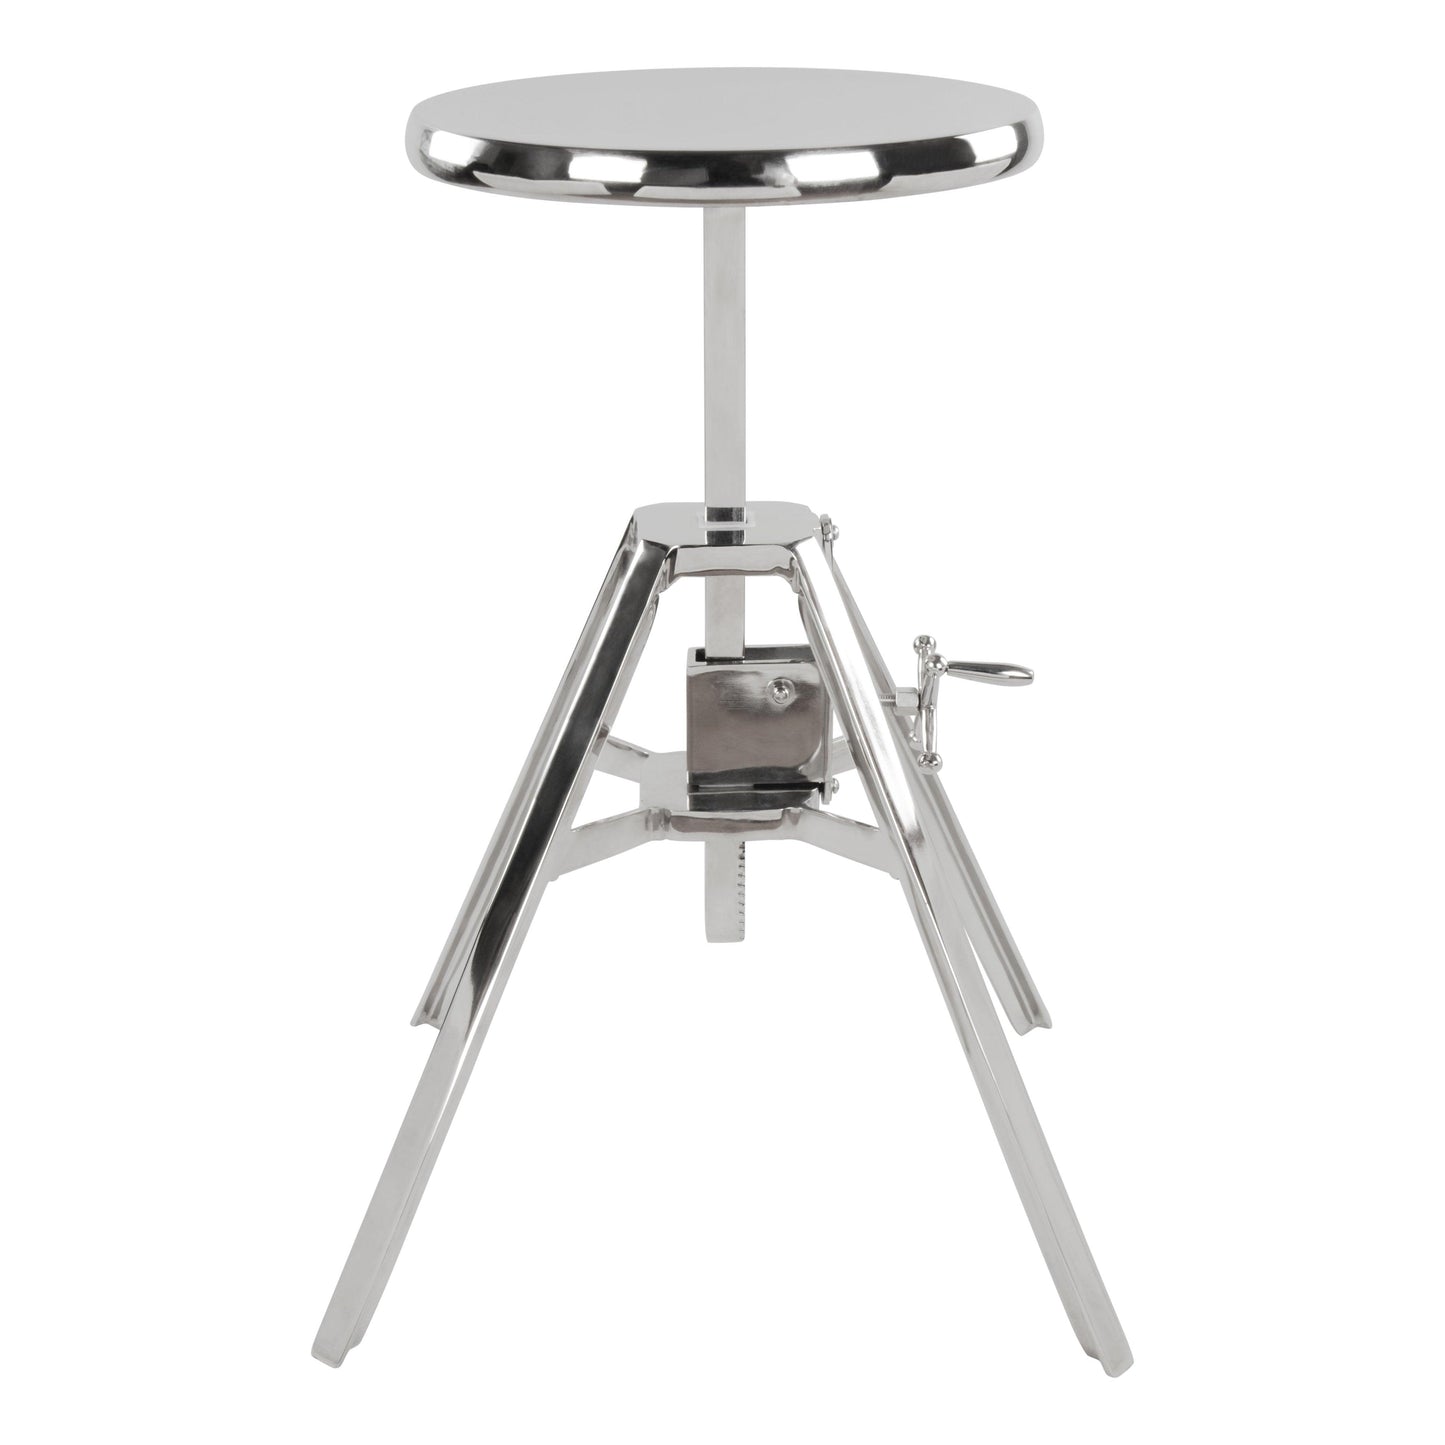 Mercy Stool Nickel - Sideboards and Things Brand_Zuo Modern, Color_Silver, Depth_10-20, Features_Adjustable Height, Finish_Antiqued, Height_20-30, Materials_Metal, Metal Type_Aluminum, Metal Type_Iron, Product Type_Stool, Width_10-20